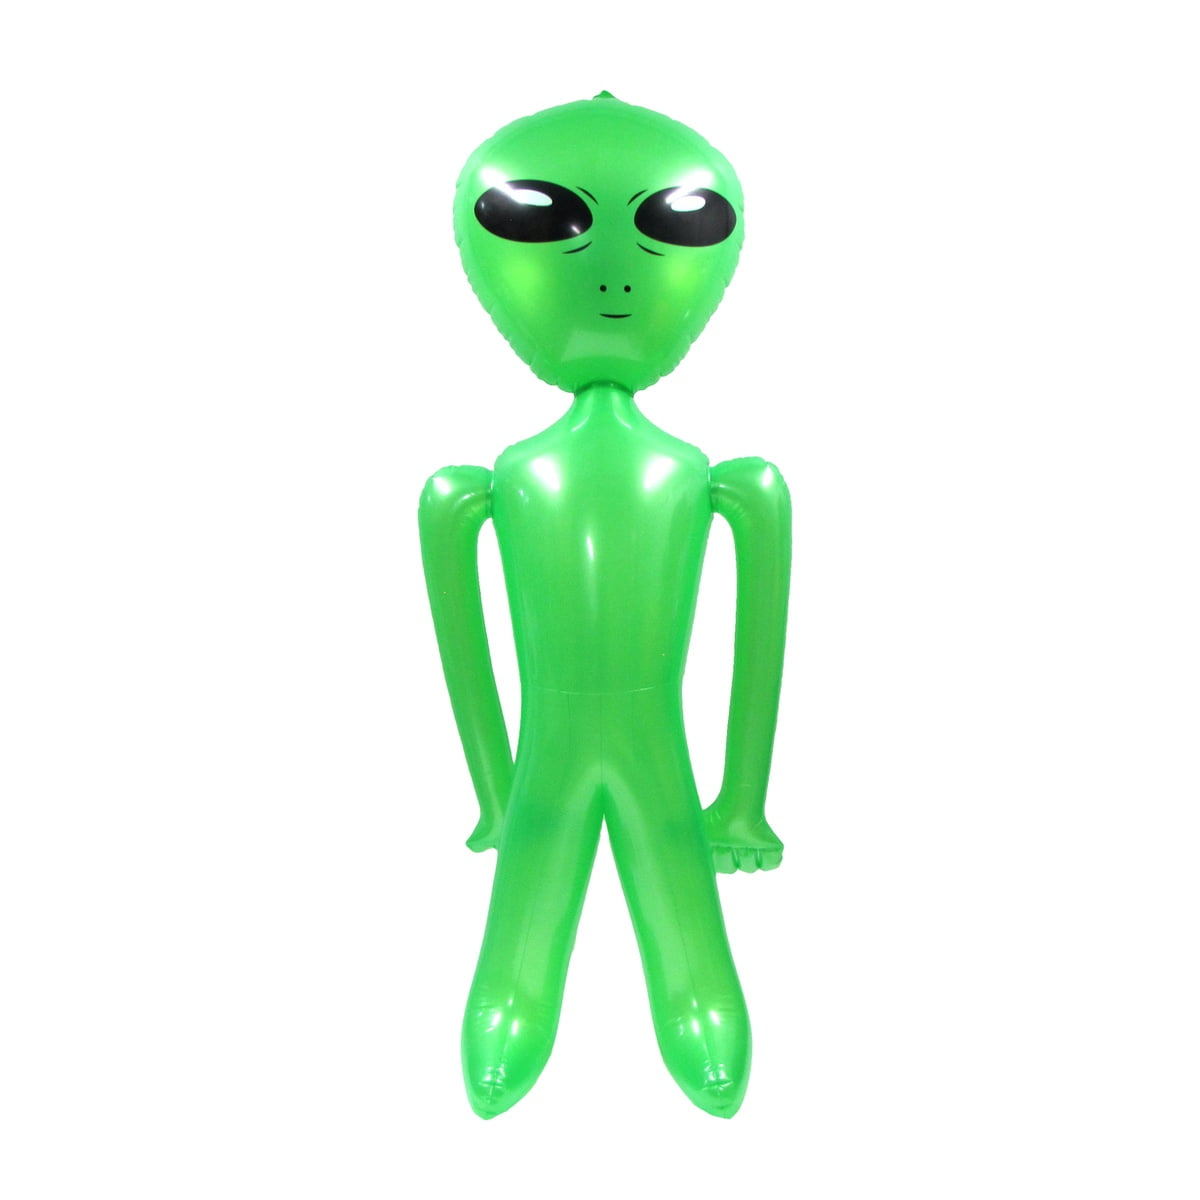 2 BIG BLOW UP GREEN ALIEN 2 FEET TALL inflatable aliens 24 IN inflate space toy 